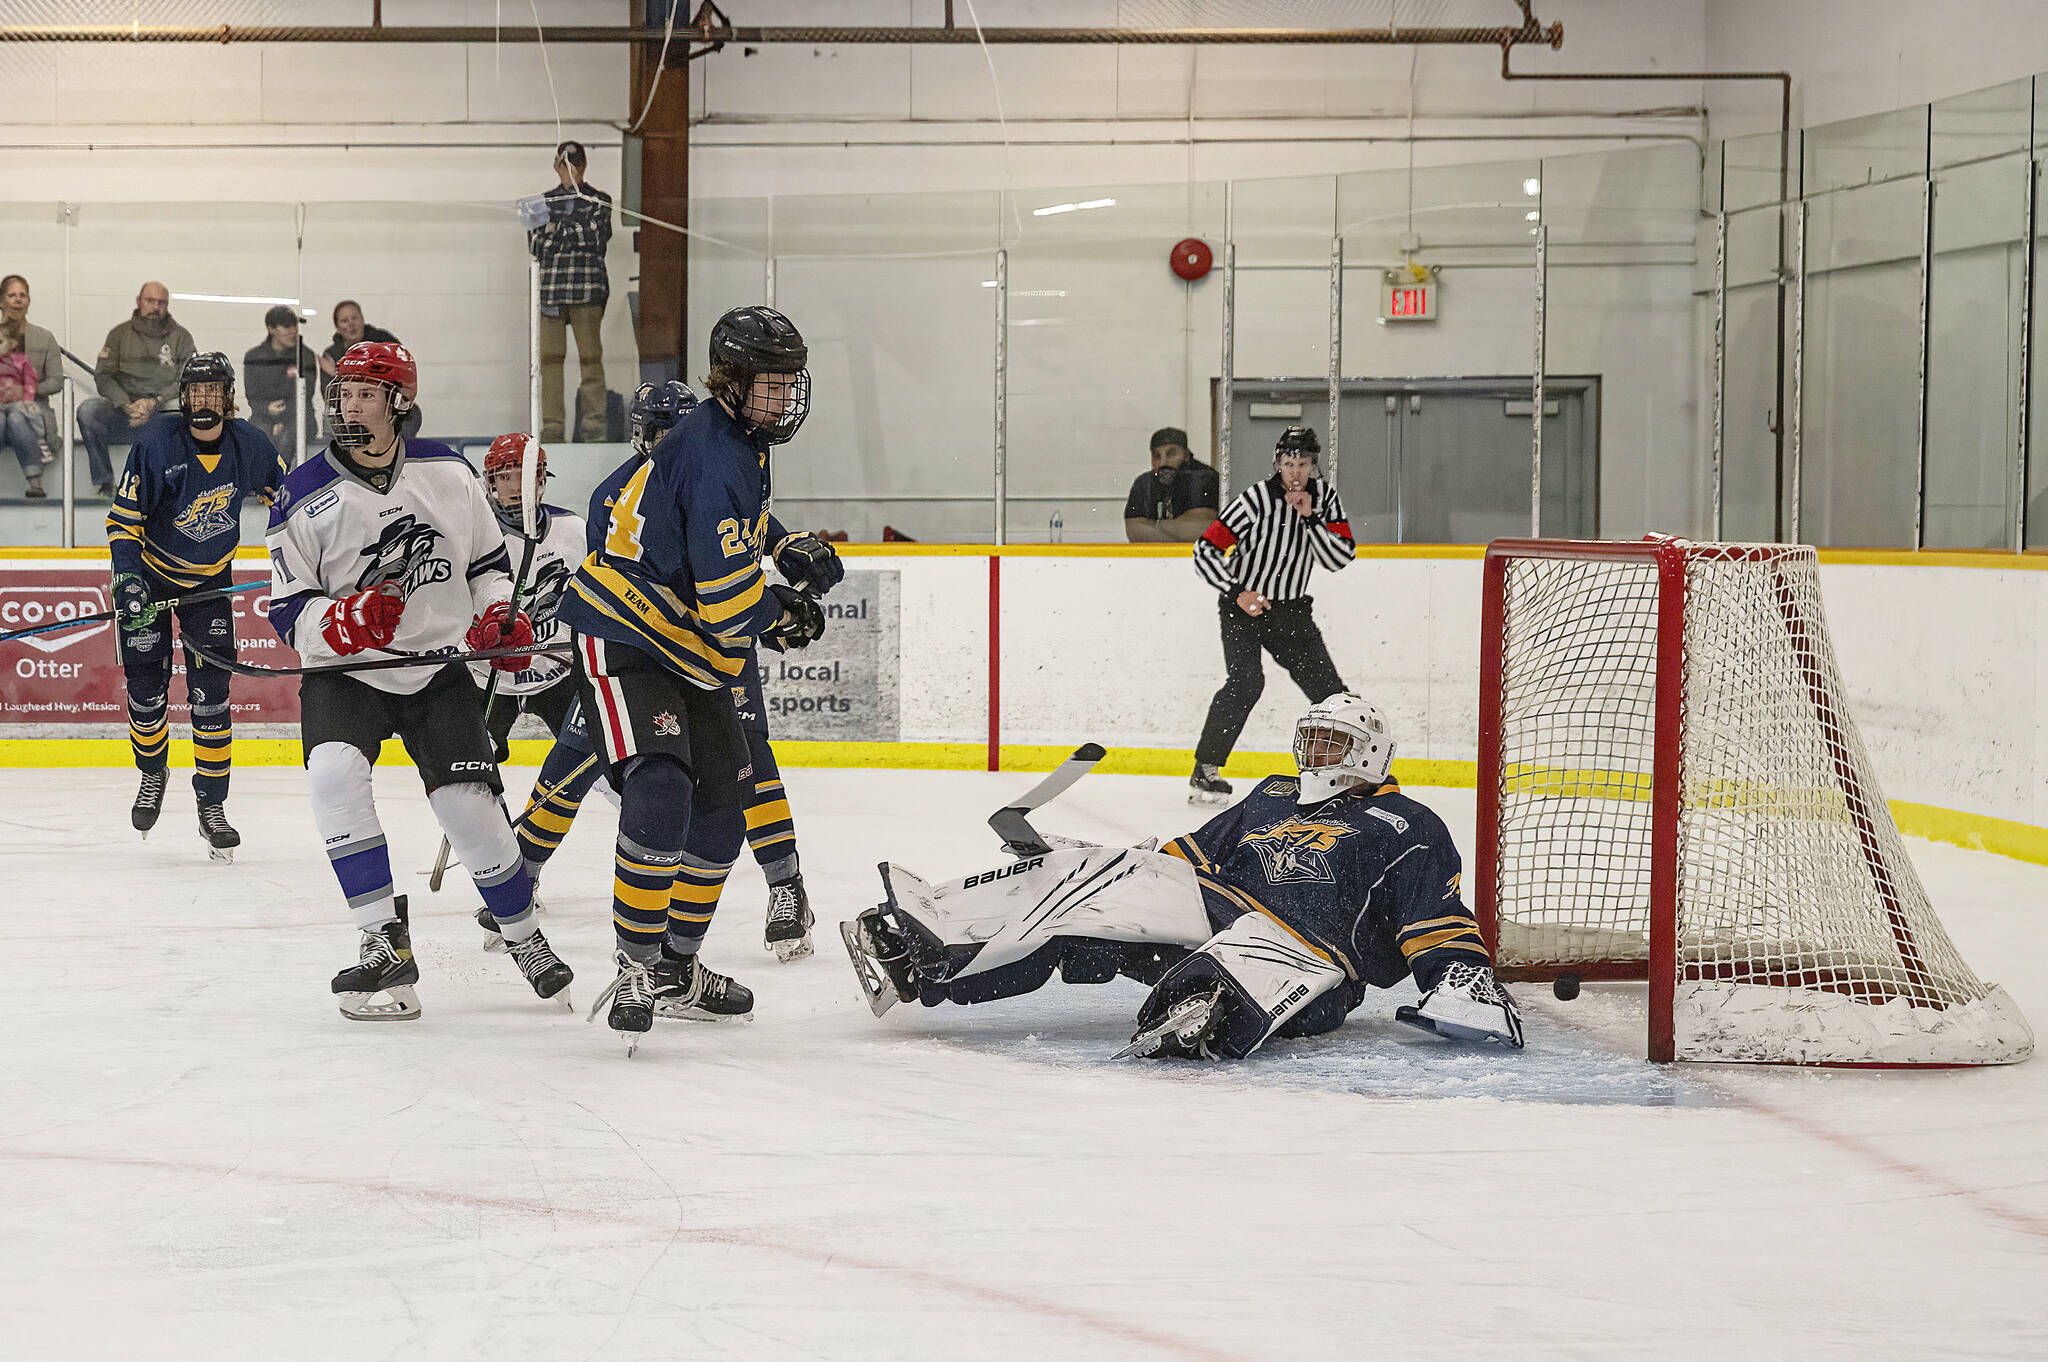 Mission City Outlaws to drop puck on new season in matchup with Chilliwack  - Mission City Record